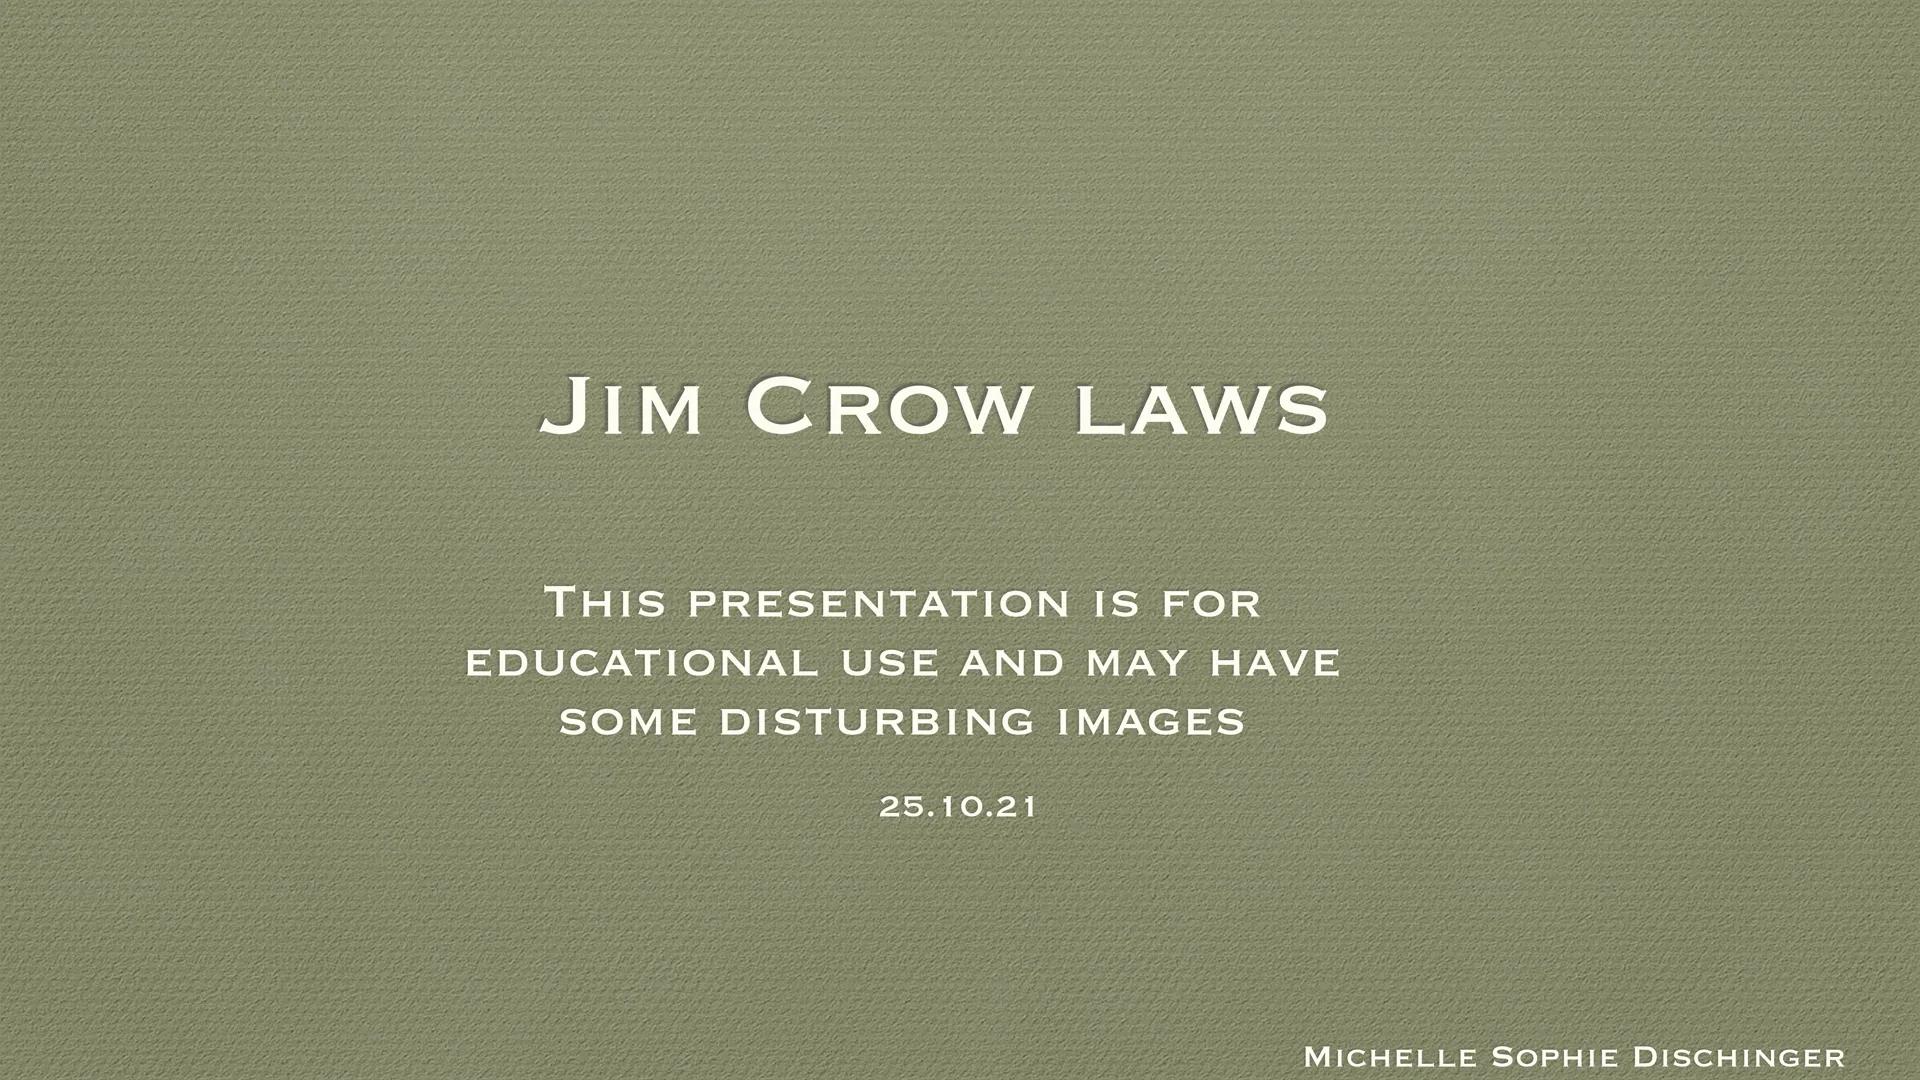 JIM CROW LAWS
THIS PRESENTATION IS FOR
EDUCATIONAL USE AND MAY HAVE
SOME DISTURBING IMAGES
25.10.21
MICHELLE SOPHIE DISCHINGER ●
●
●
●
●
●
●